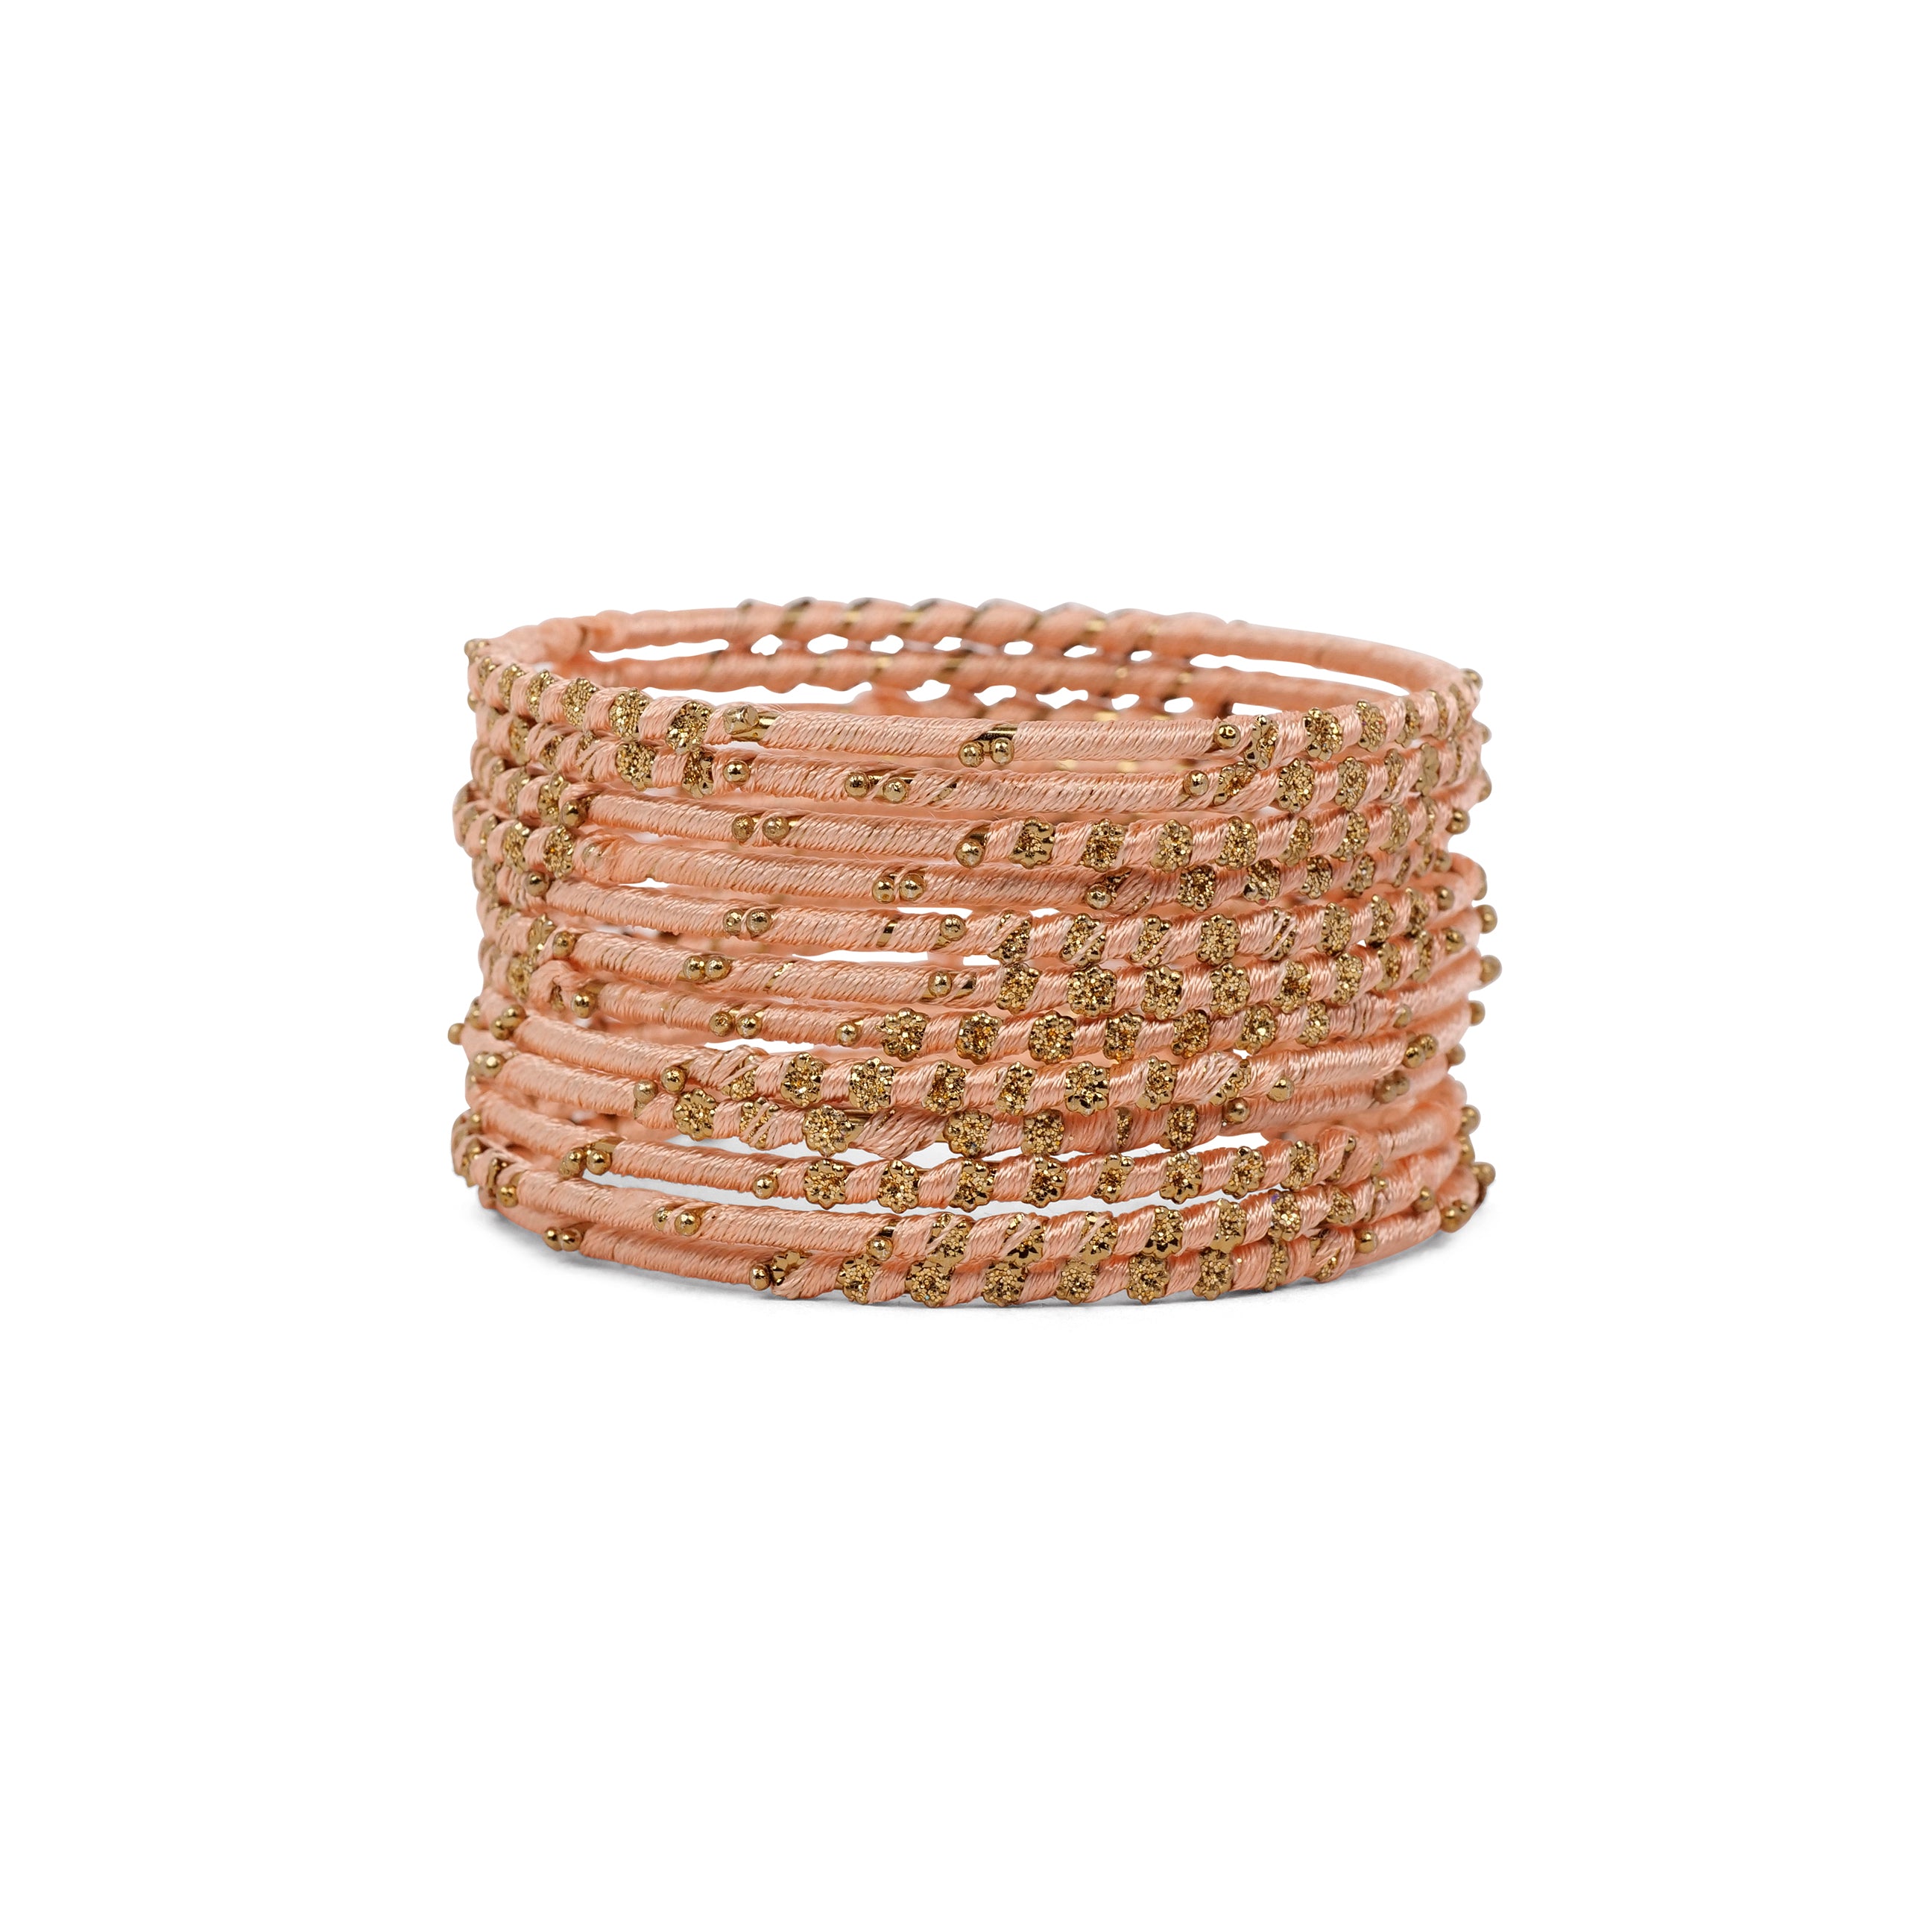 Set of 12 Floral Thead Bangles in Peach